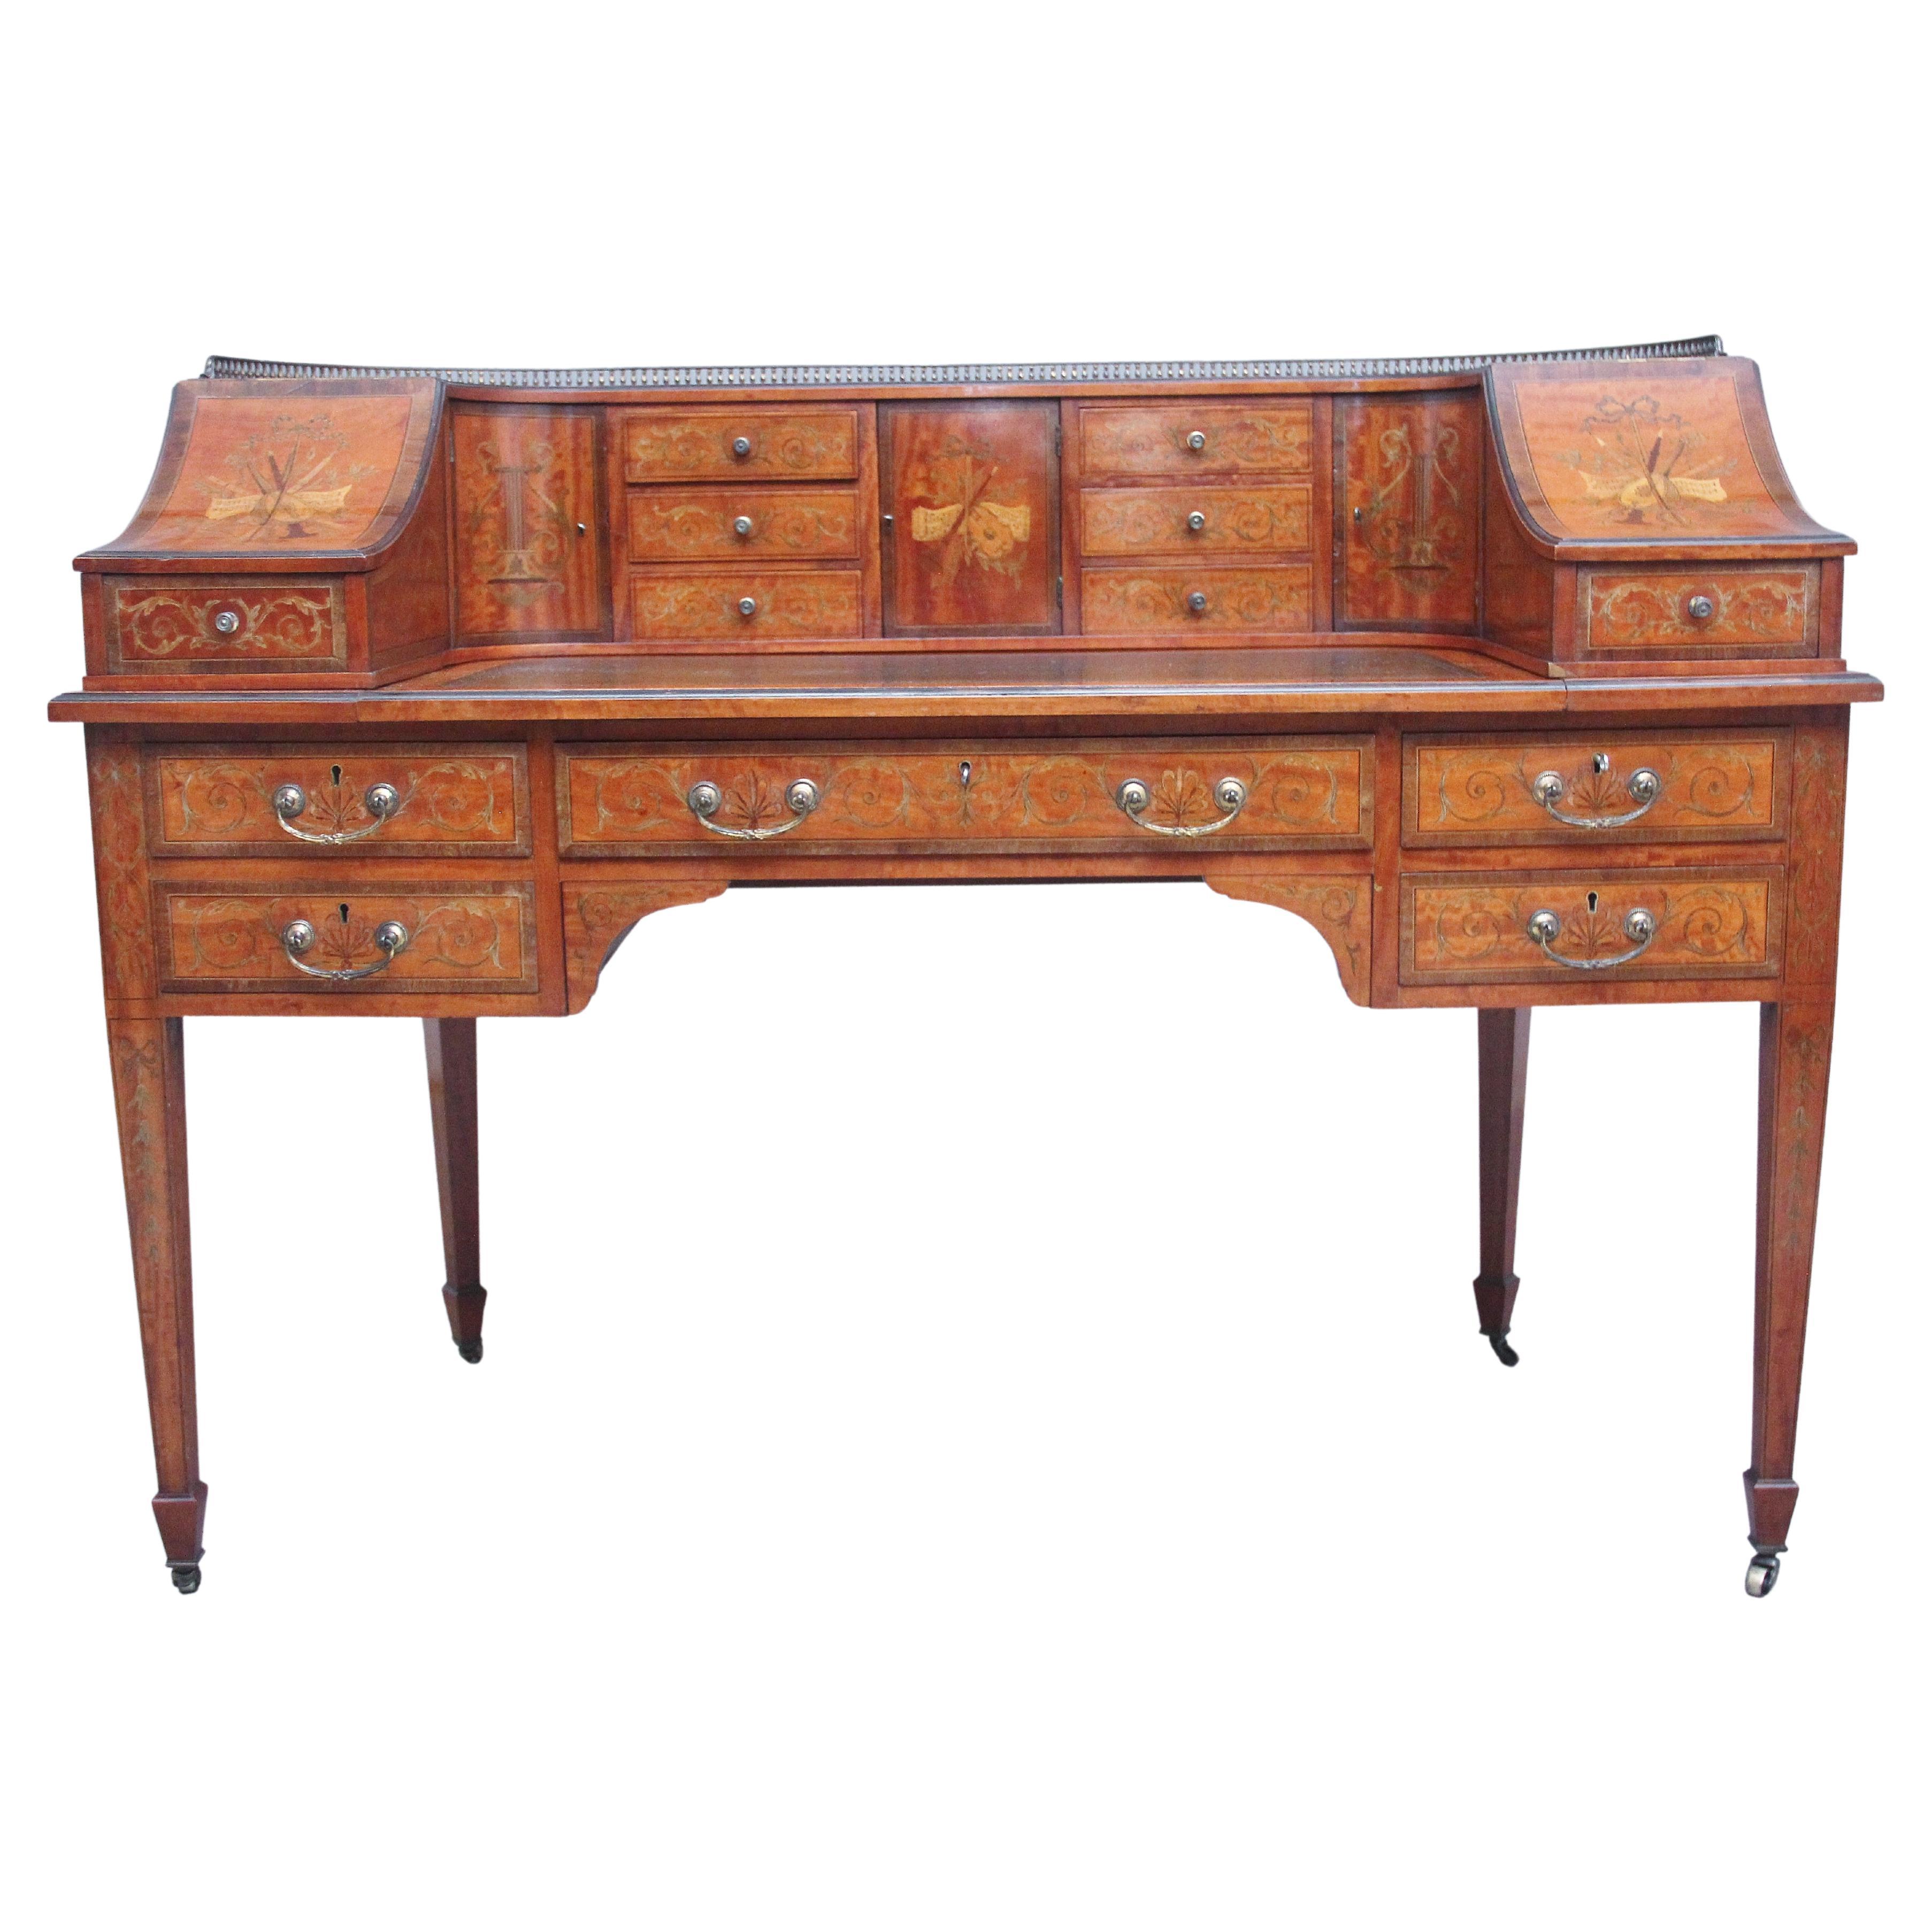 19th Century Satinwood and Inlaid Carlton House Desk